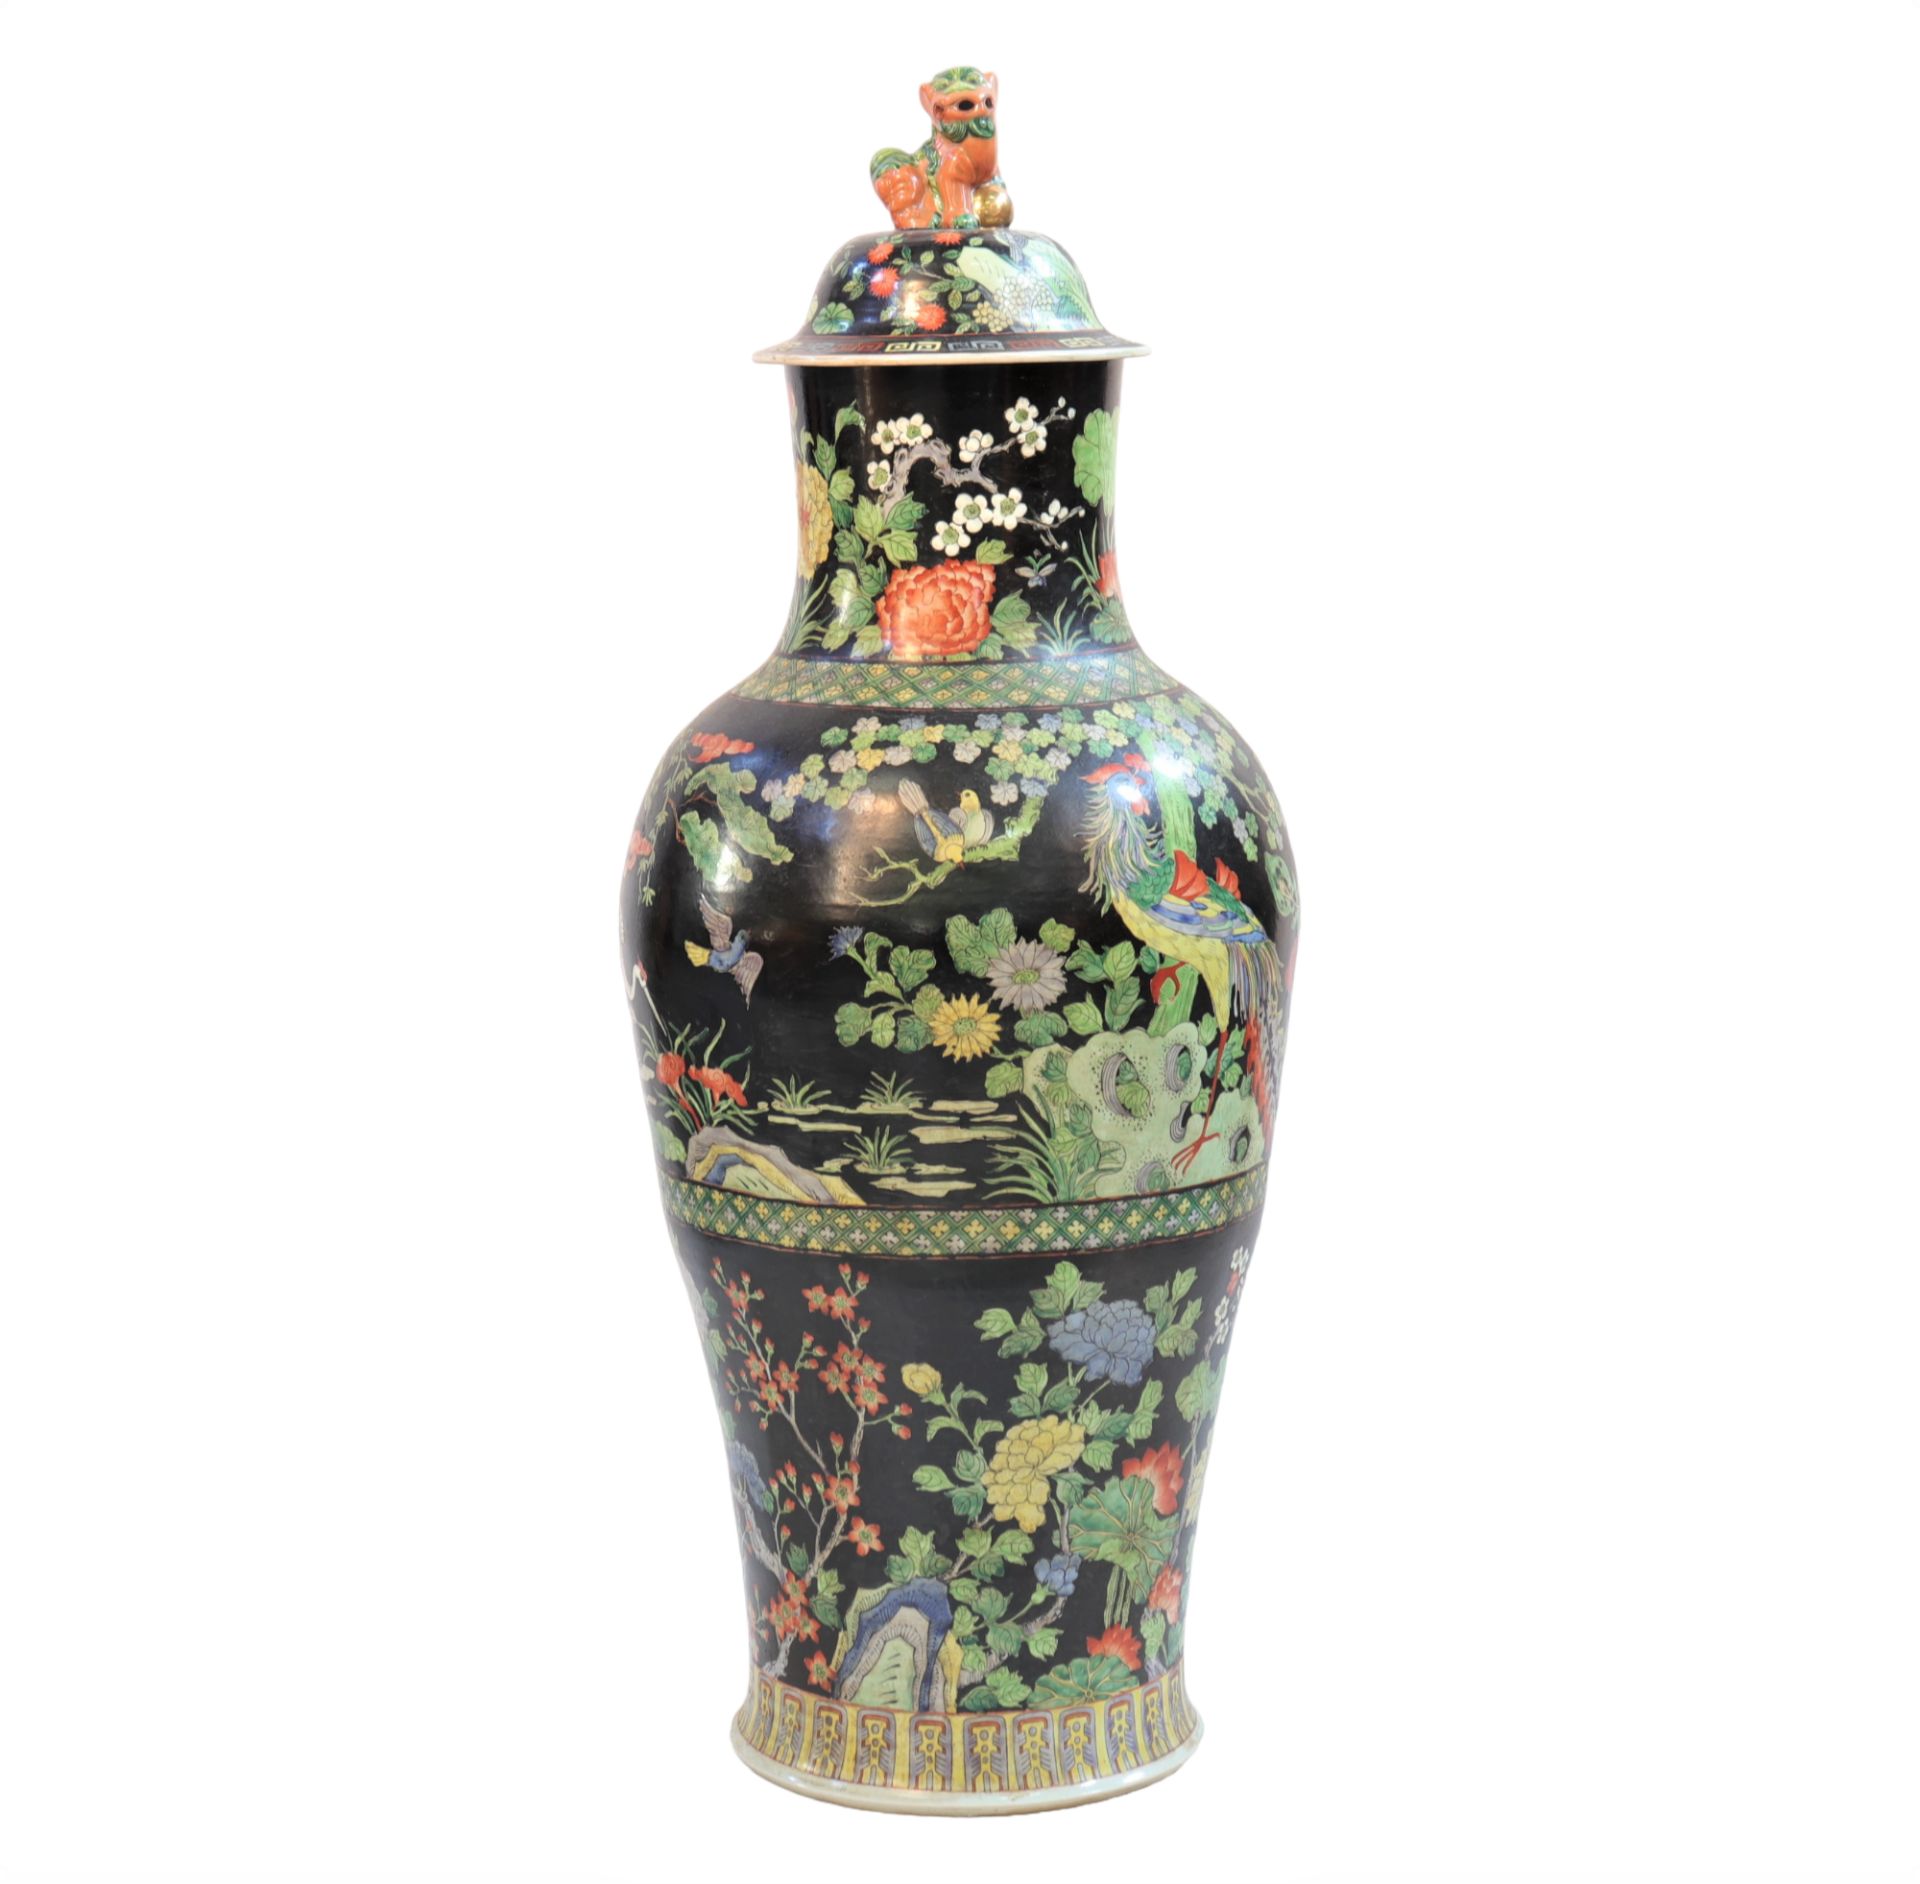 Covered vase from the Famille Noire decorated with flowers and birds from the 19th century - Image 4 of 5